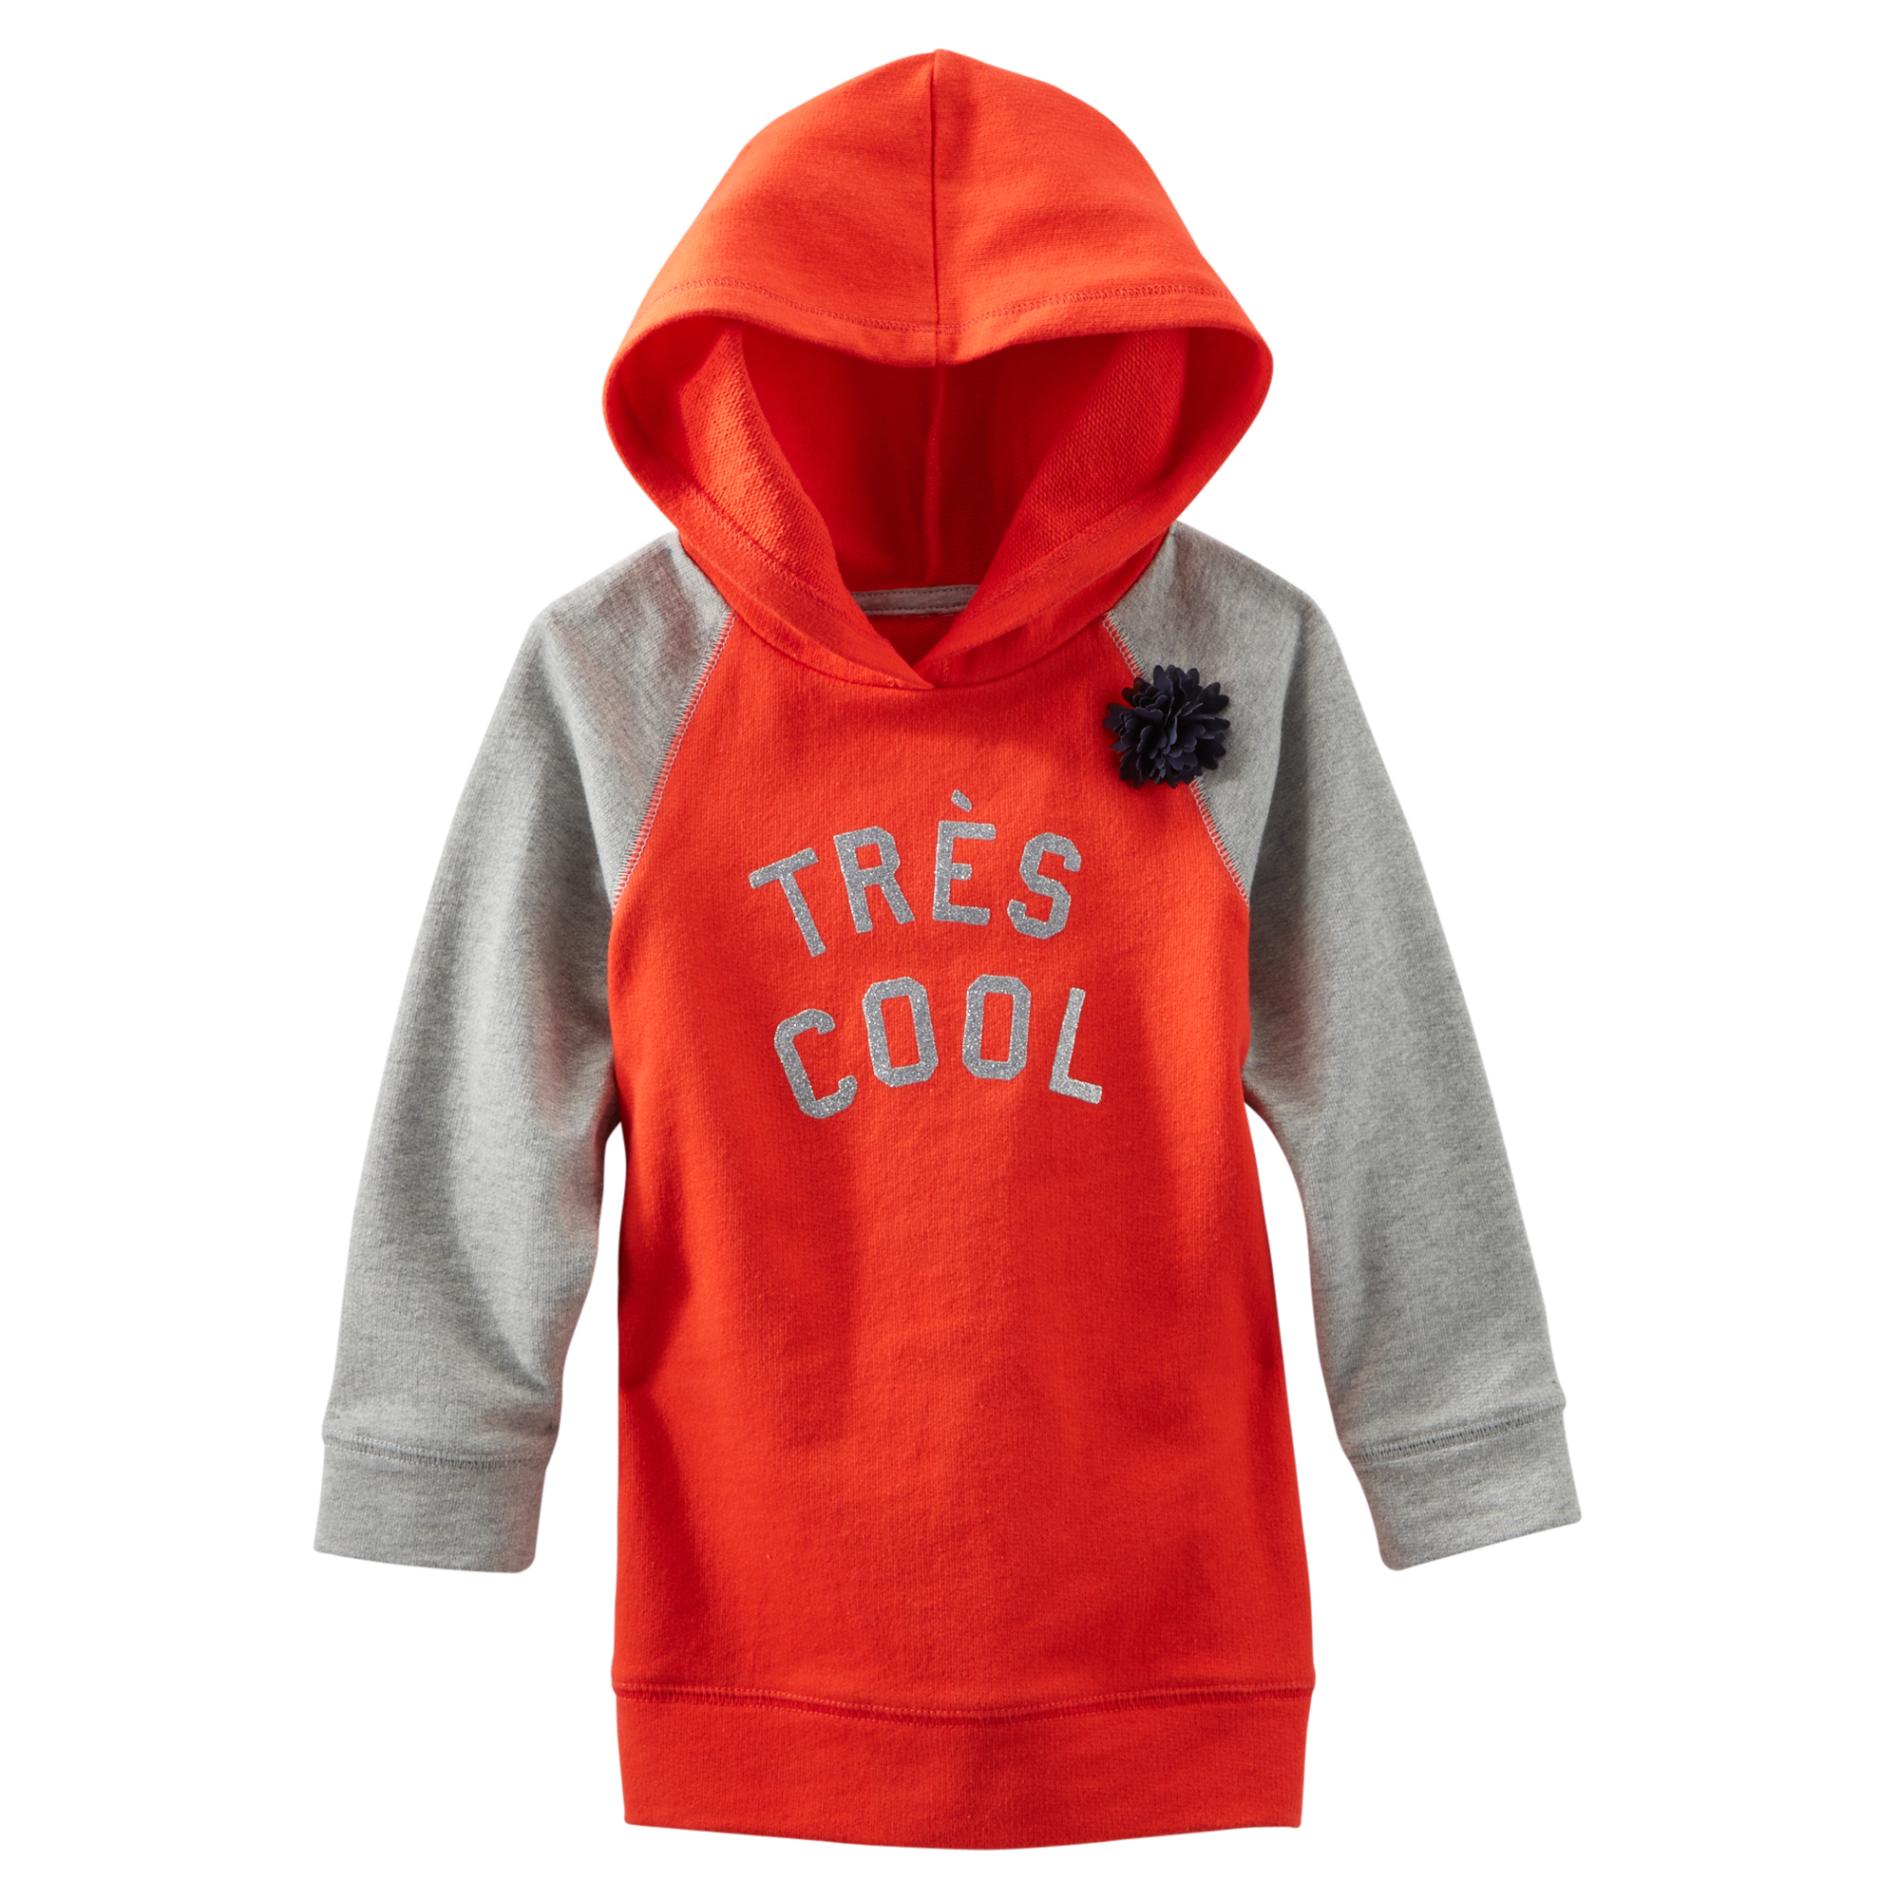 OshKosh Girl's French Terry Knit Hooded Top - Tres Cool